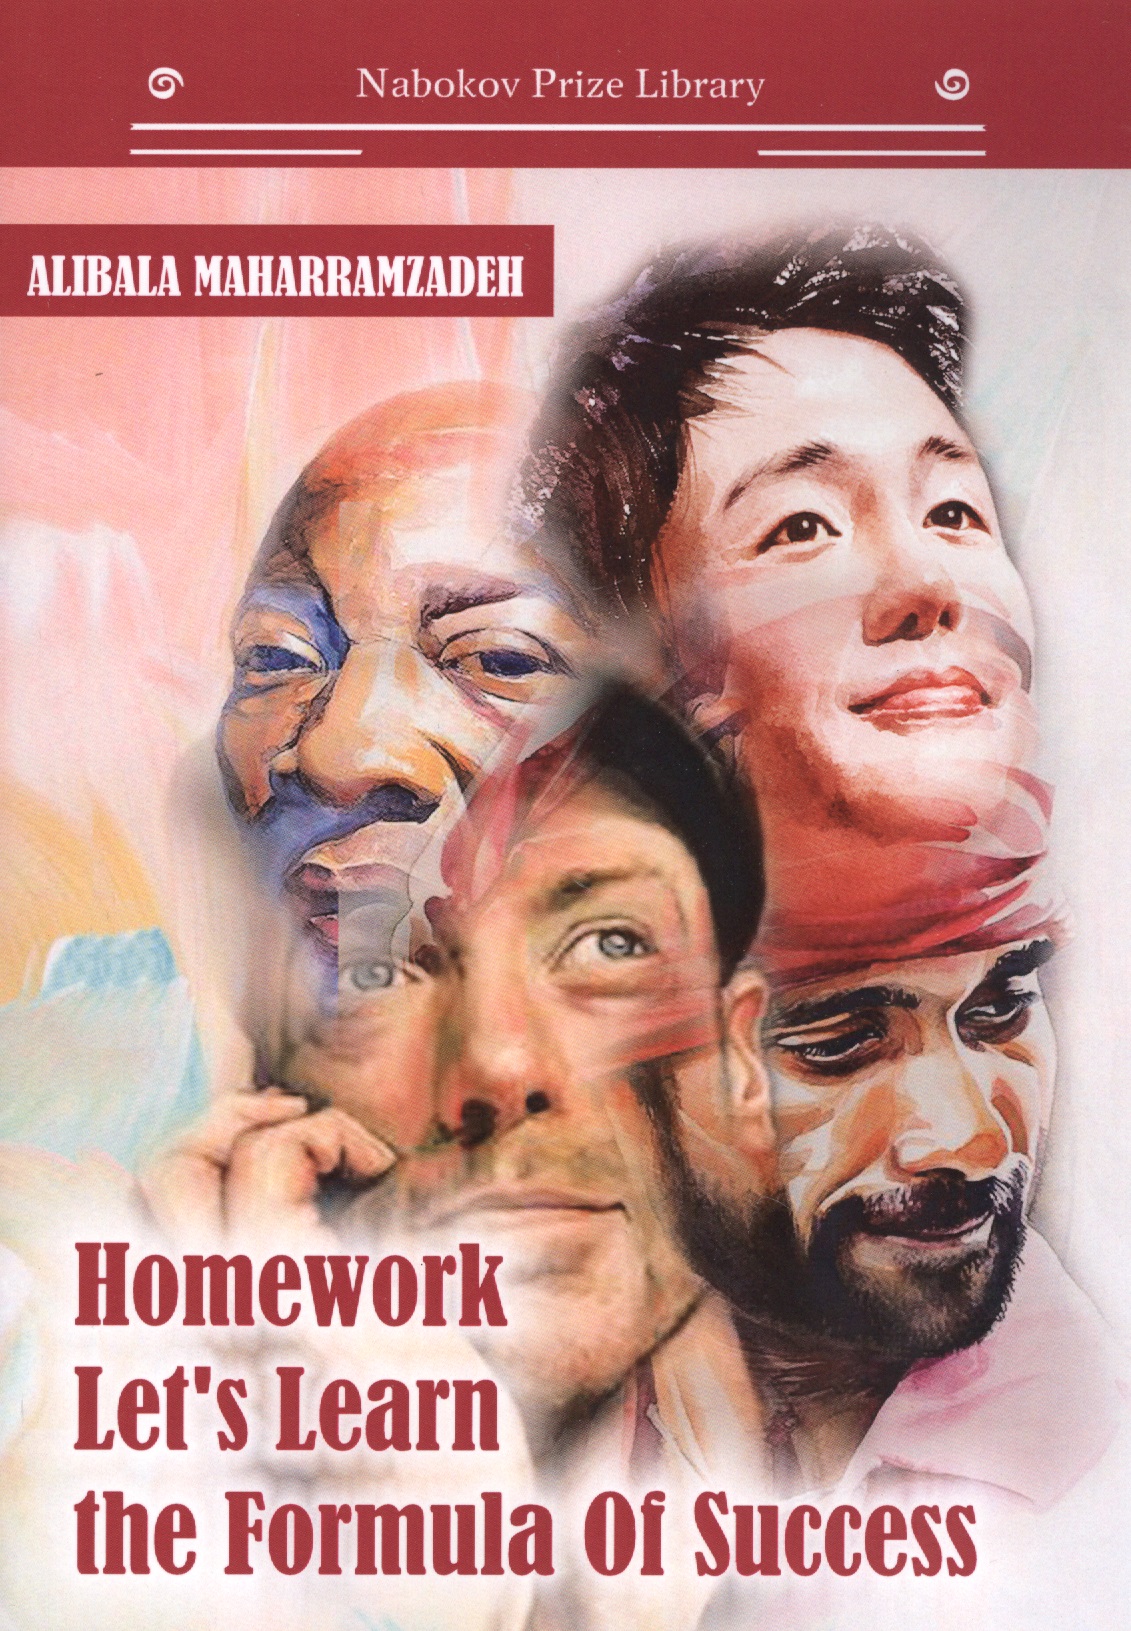 Homework Let’s Learn the Formula Of Success how to win friends and influence people chinese version success motivational books